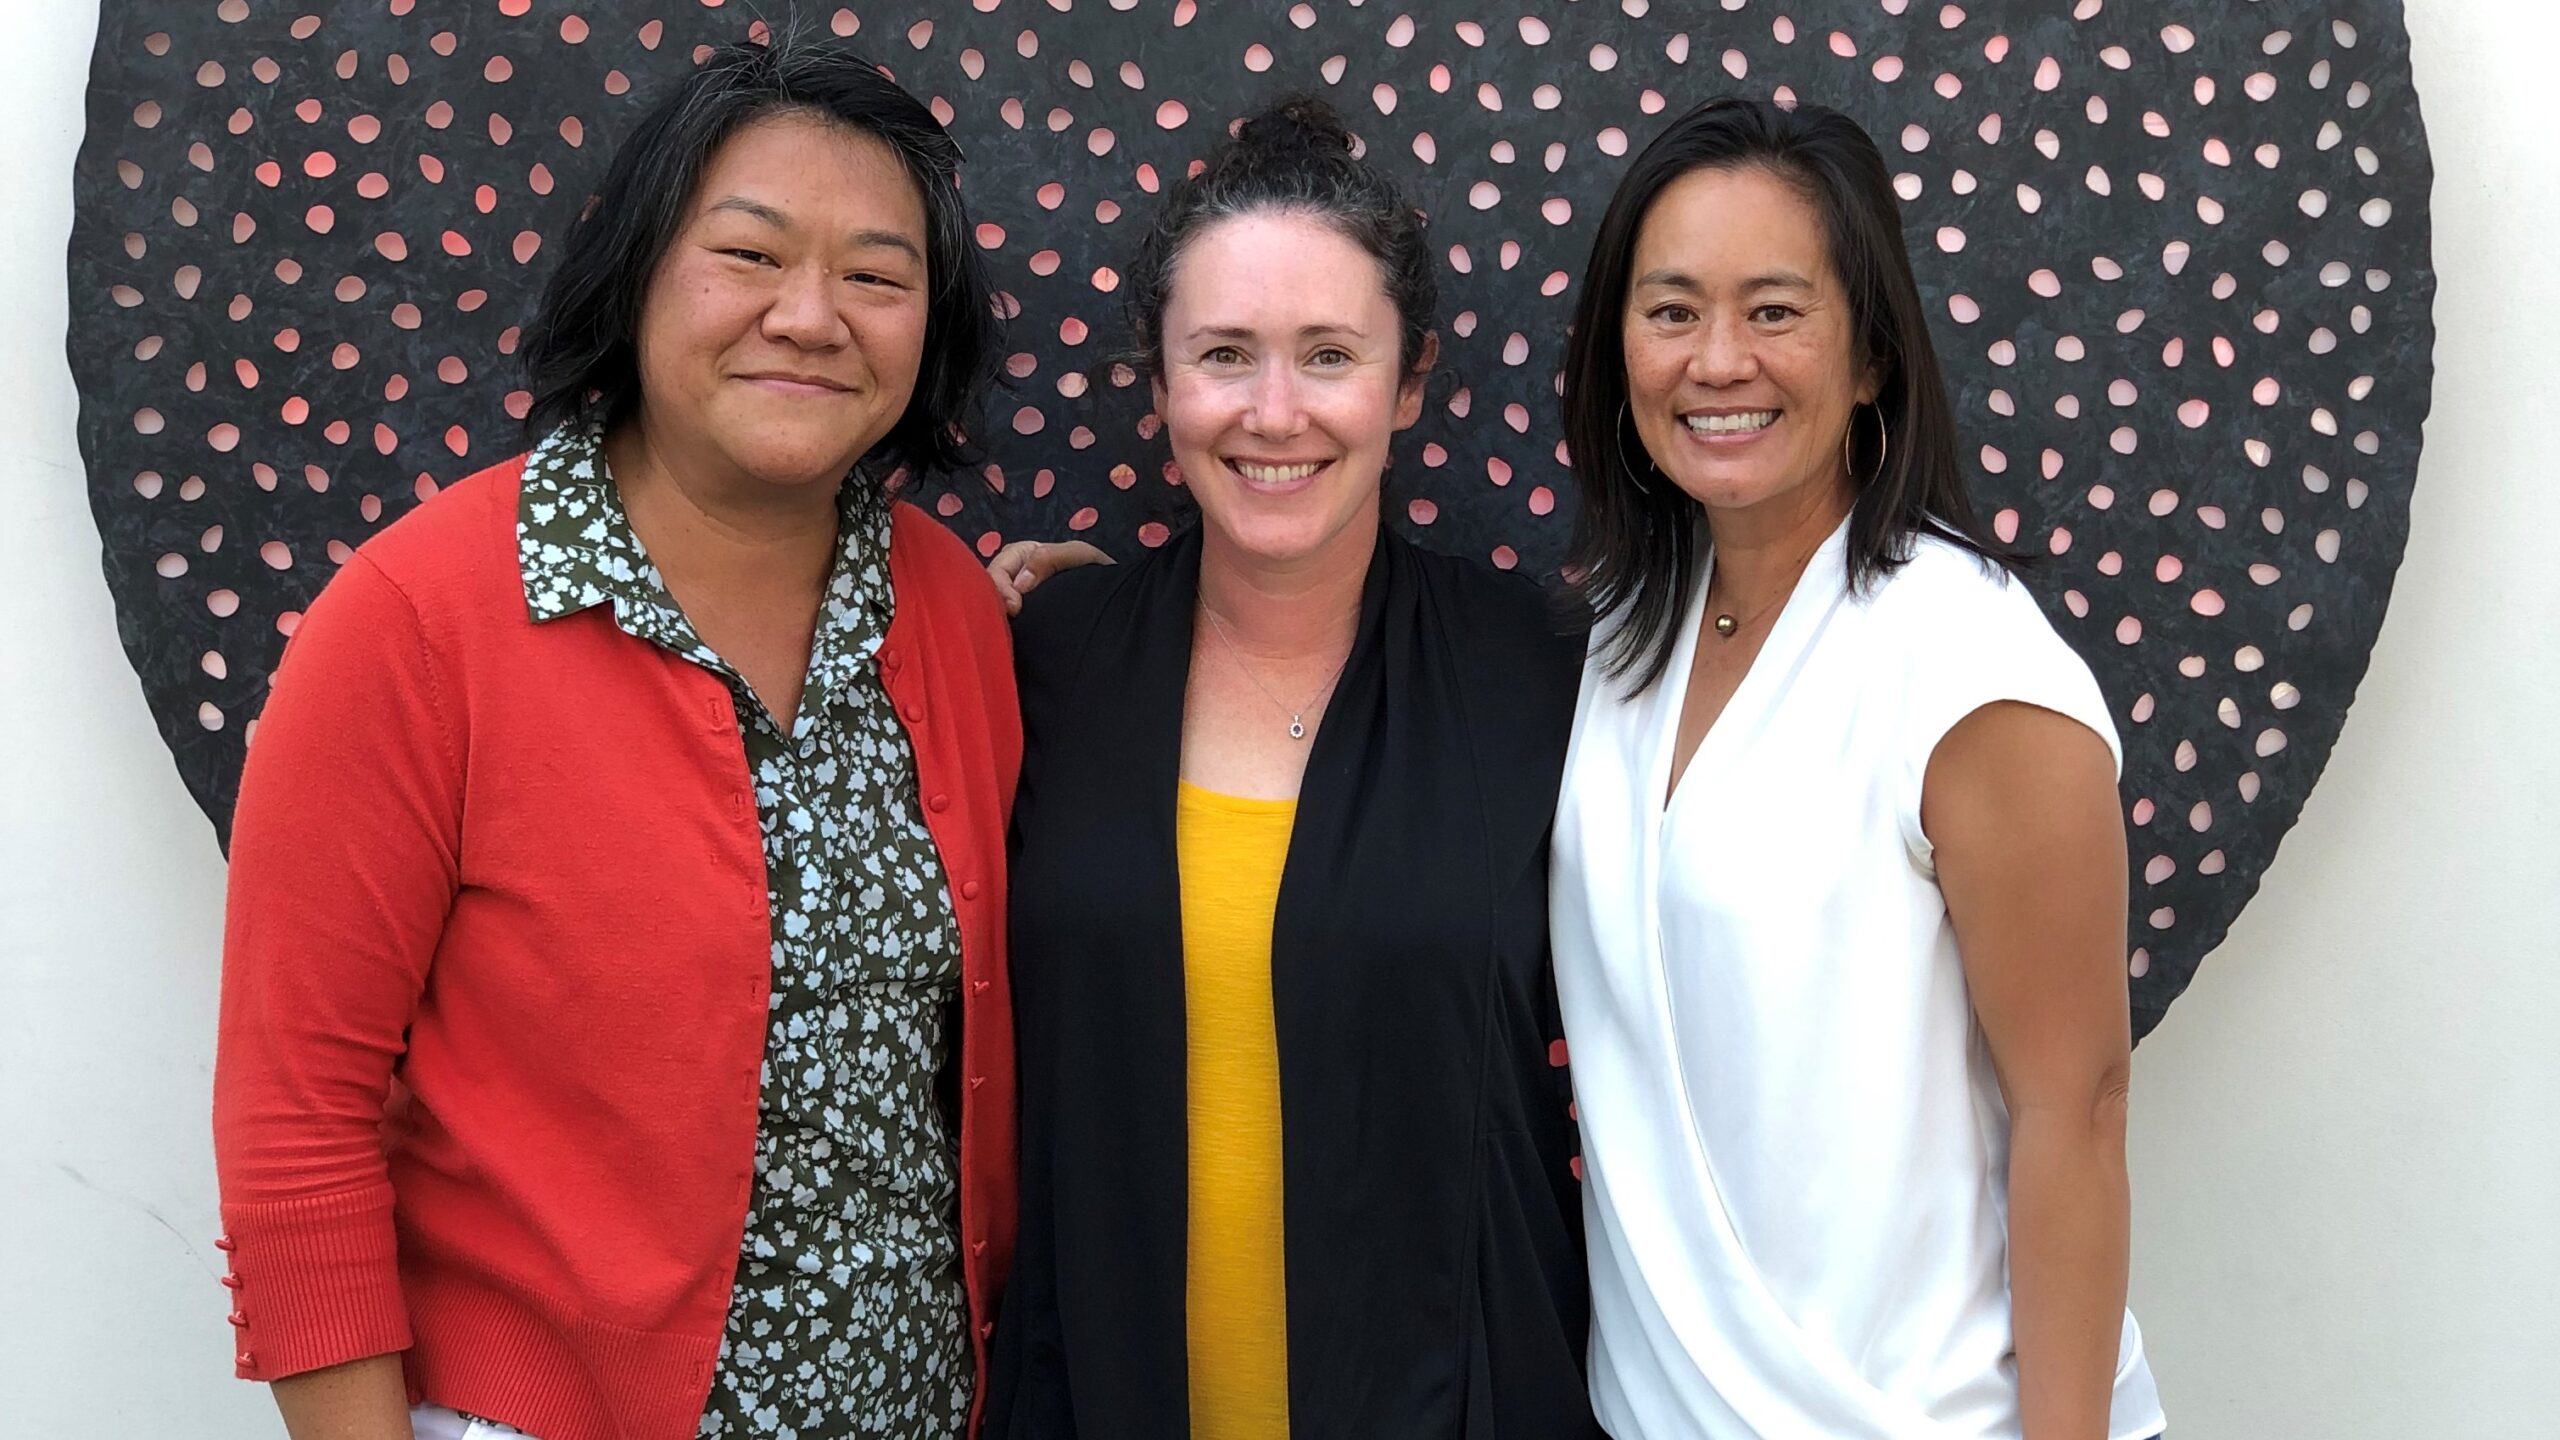 Three women smiling in front of a polka-dot wall